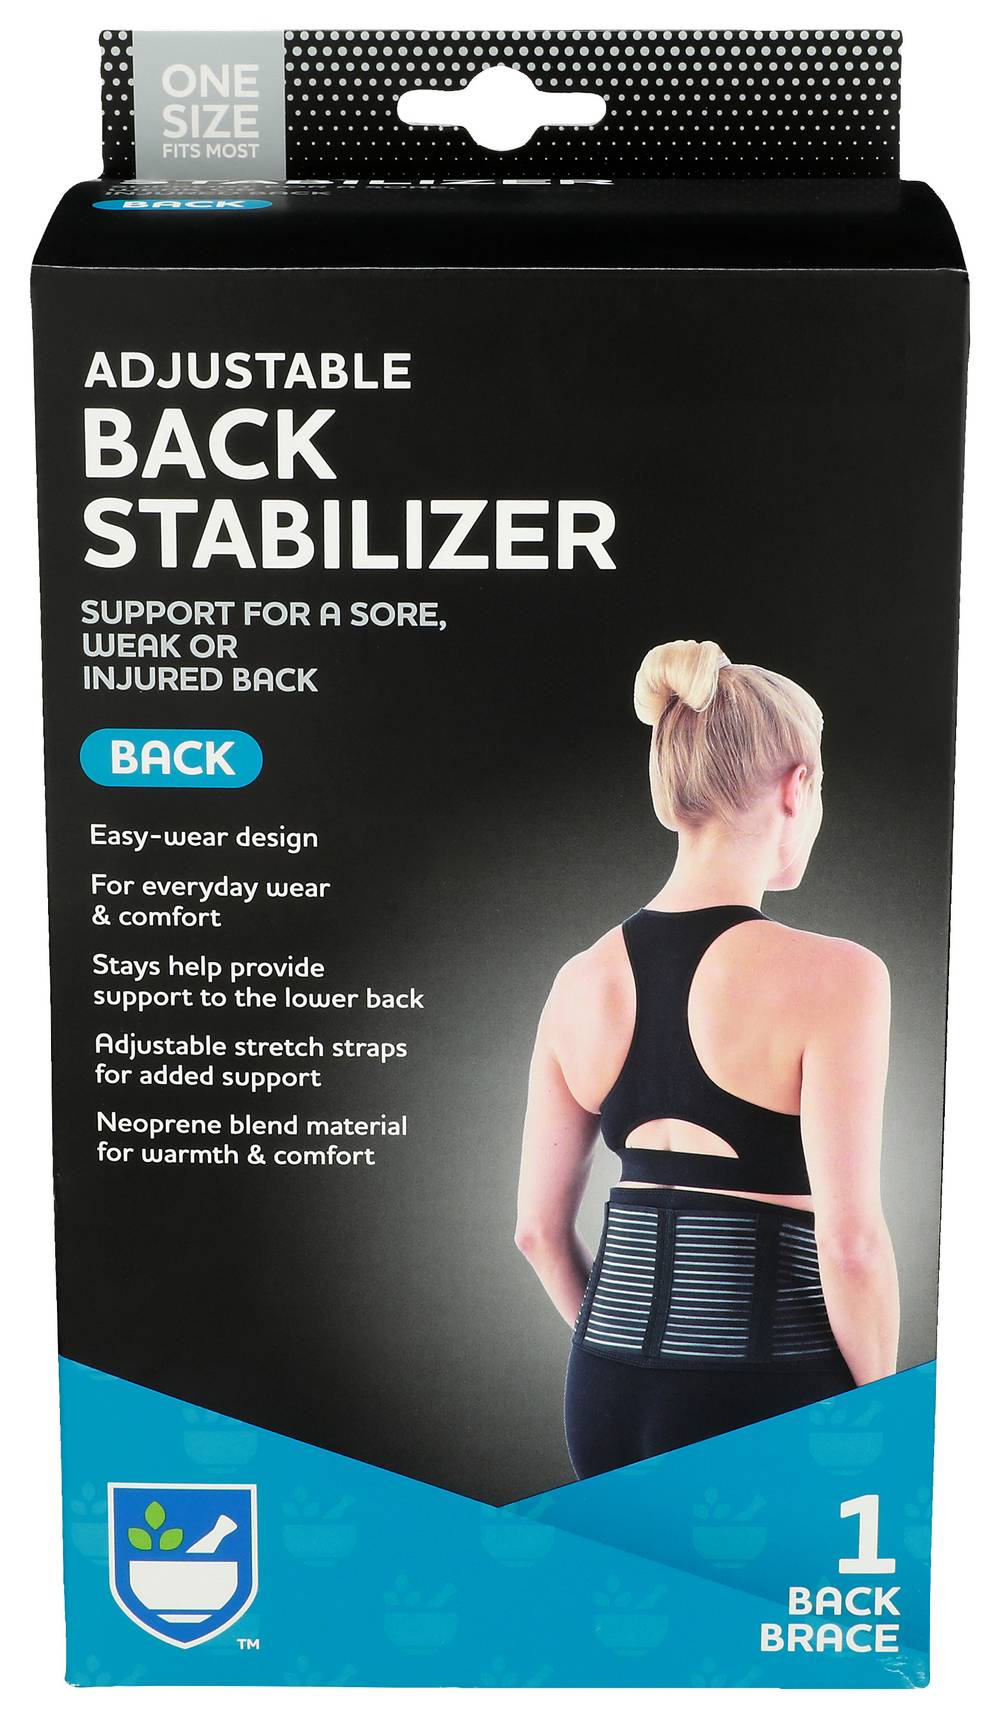 Rite Aid Adjustable Back Stabilizer One Size (1 ct)